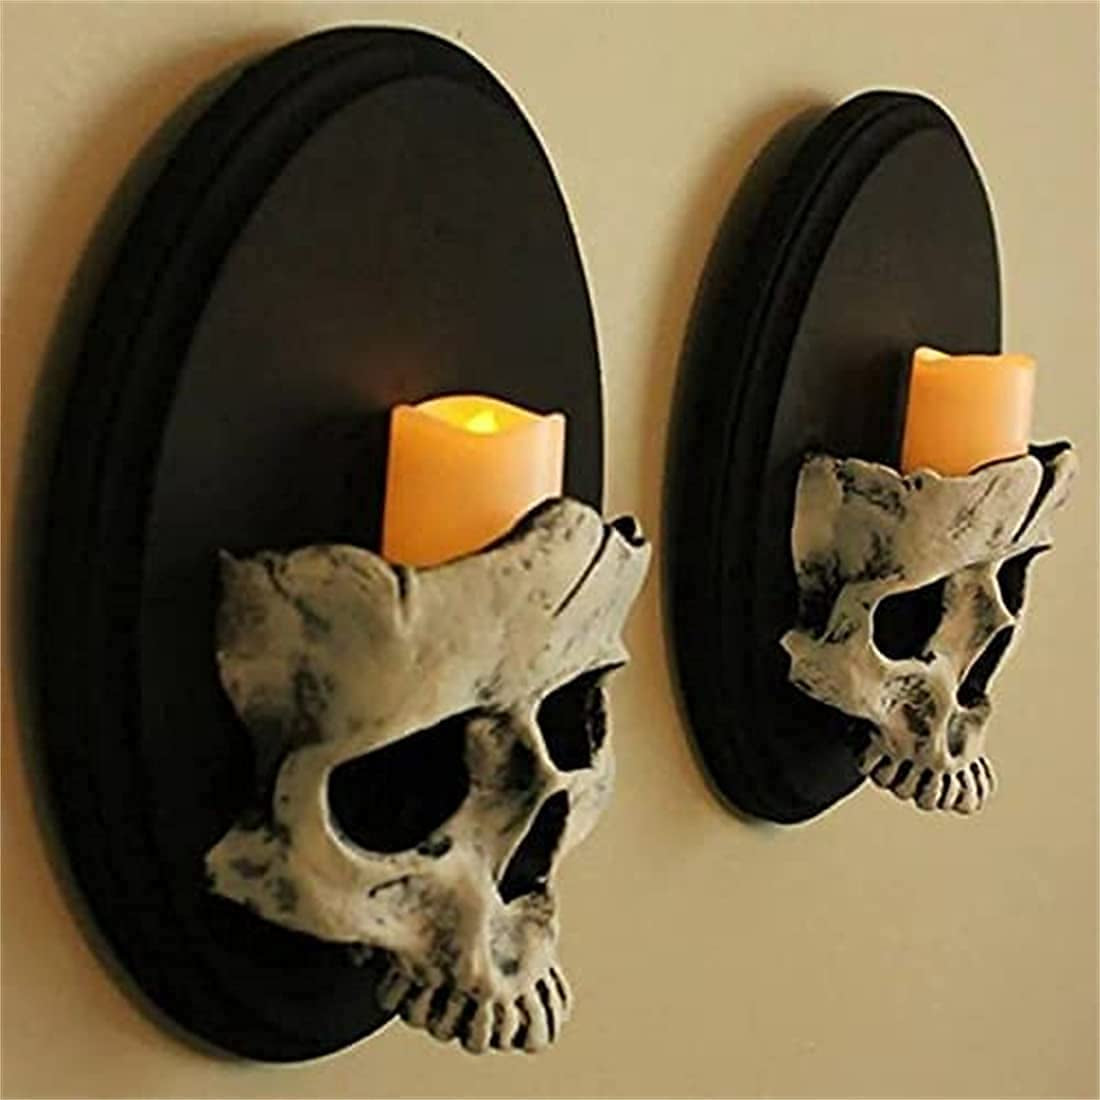 Skull Wall Candle Holder ，Skull Candle Holder Gothic Decor Halloween Decorations ，Suitable for Halloween Candlelight Dinner, Dining Room, Living Room and Shop（2Pcs）